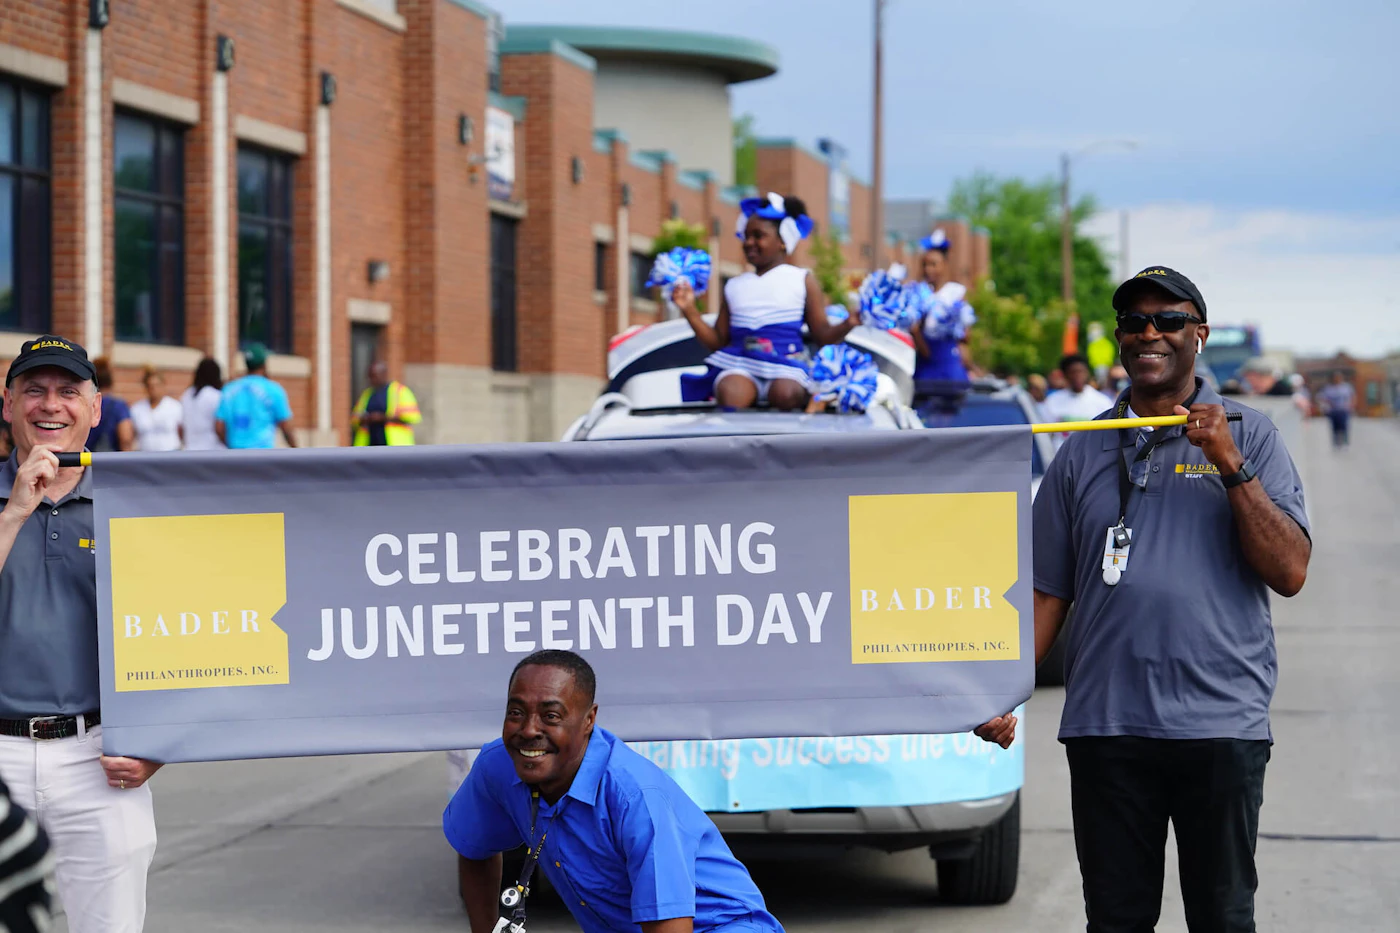 Milwaukee, Wisconsin USA - June 19th, 2021: African American community members of Milwaukee held a parade to celebrate Juneteenth holiday. (Photo via Aaron of L.A. Photography, Shutterstock)